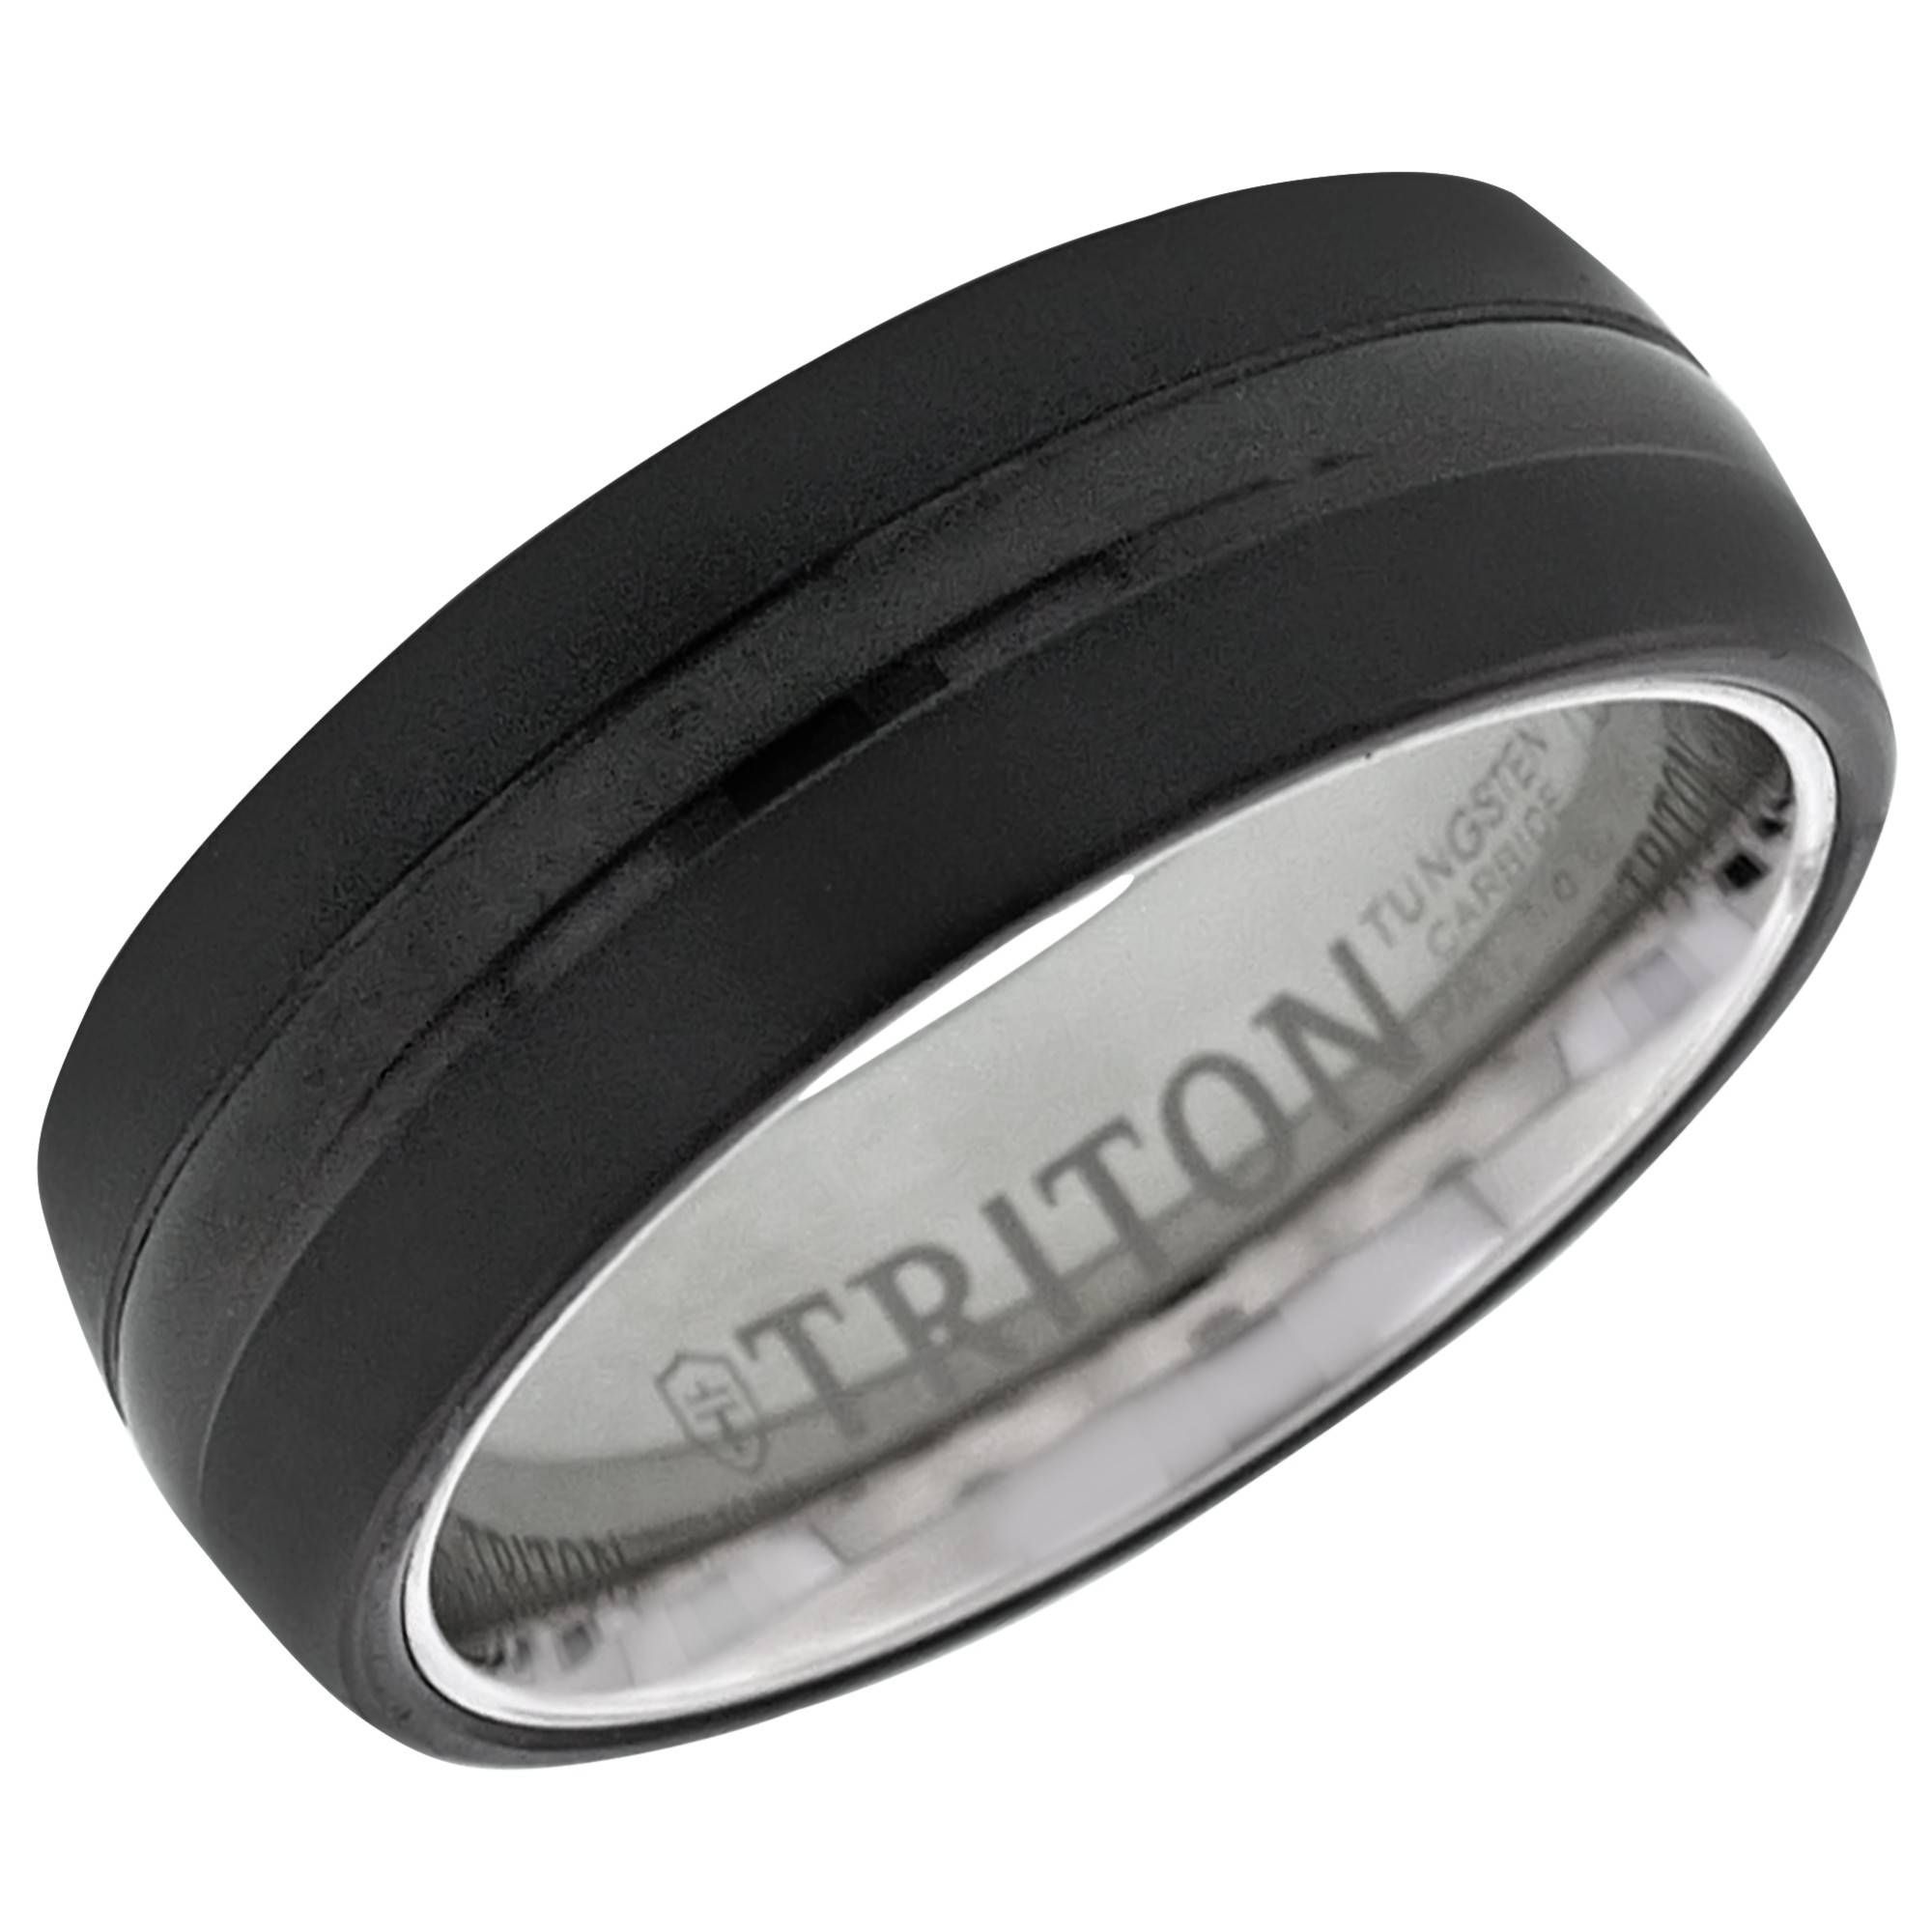 Mens Wedding Band In Black And White Tungsten (8mm) In Black Mens Wedding Bands (View 12 of 15)